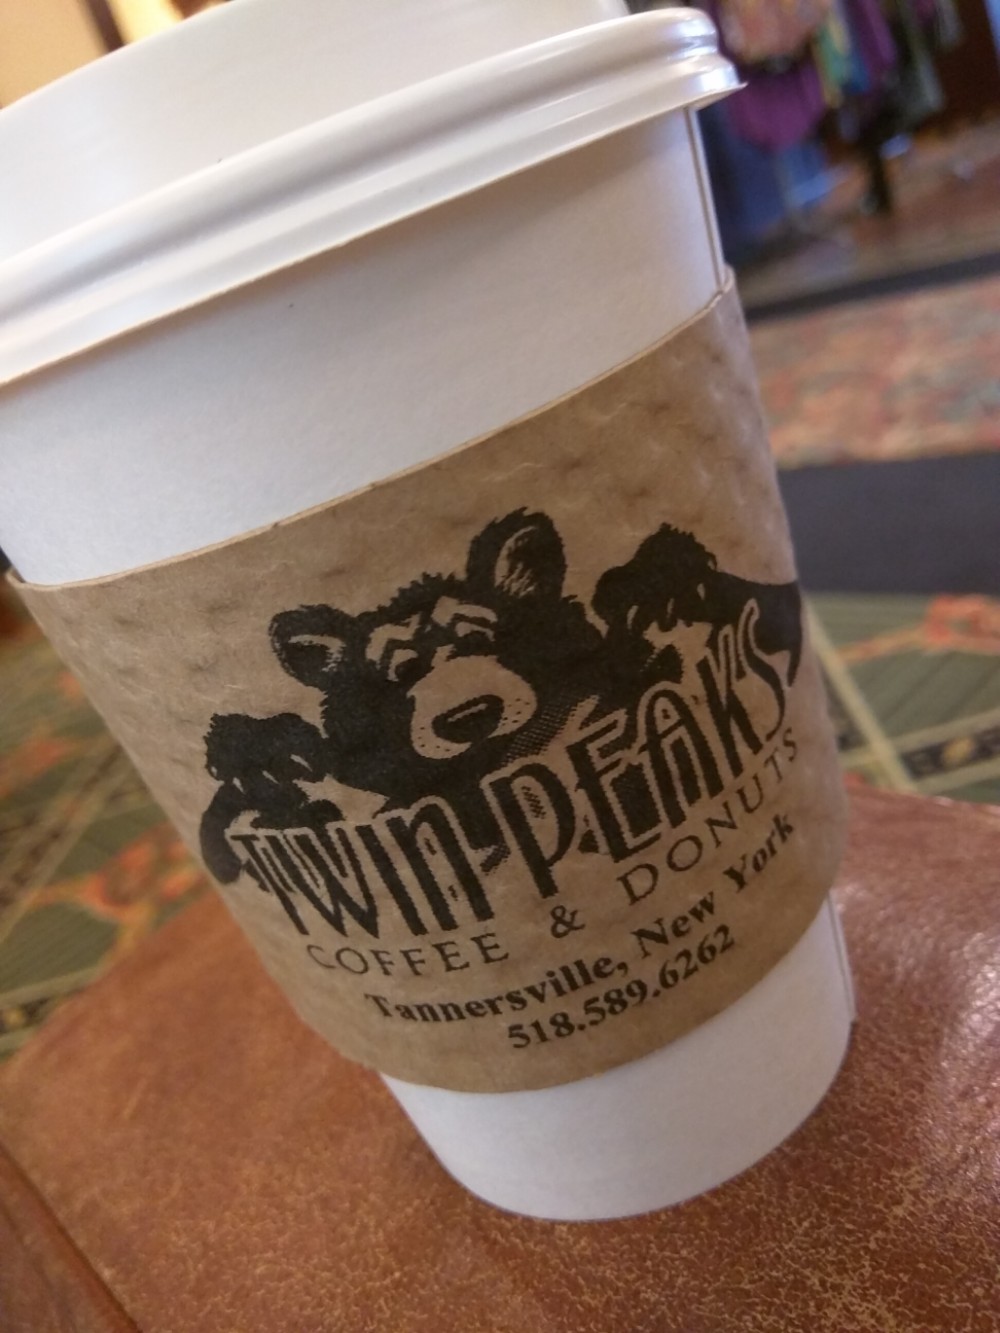 Twin Peaks Coffee & Donuts - The Espresso Chronicles